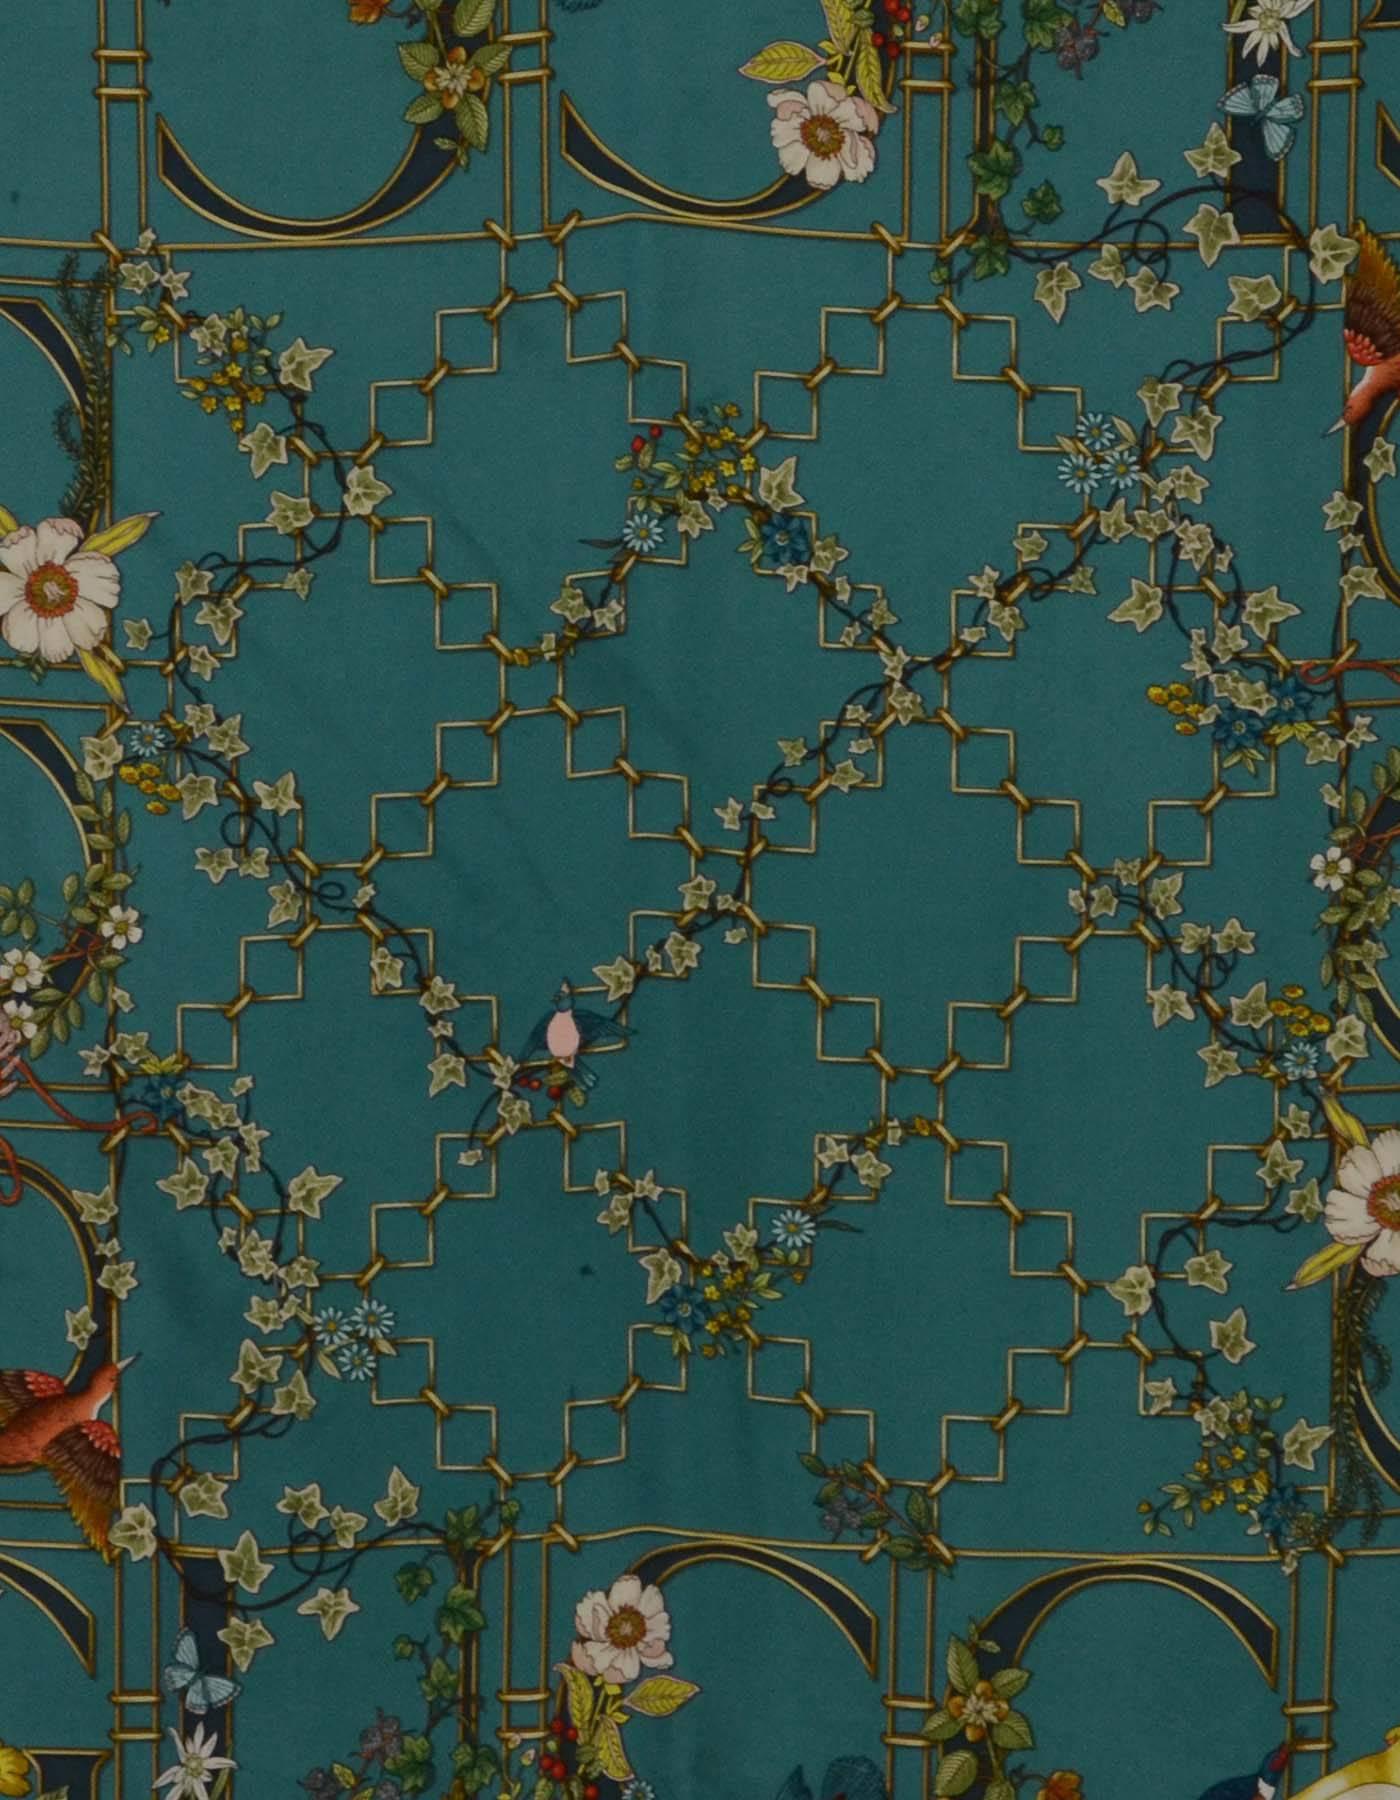 Gucci Turquoise Ivy & Floral Print 90cm Silk Scarf
Features flowers, plants, and birds printed throughout
Made In: Italy
Color: Turquoise, green, brown and burgundy
Composition: 100% silk
Overall Condition: Excellent pre-owned condition with